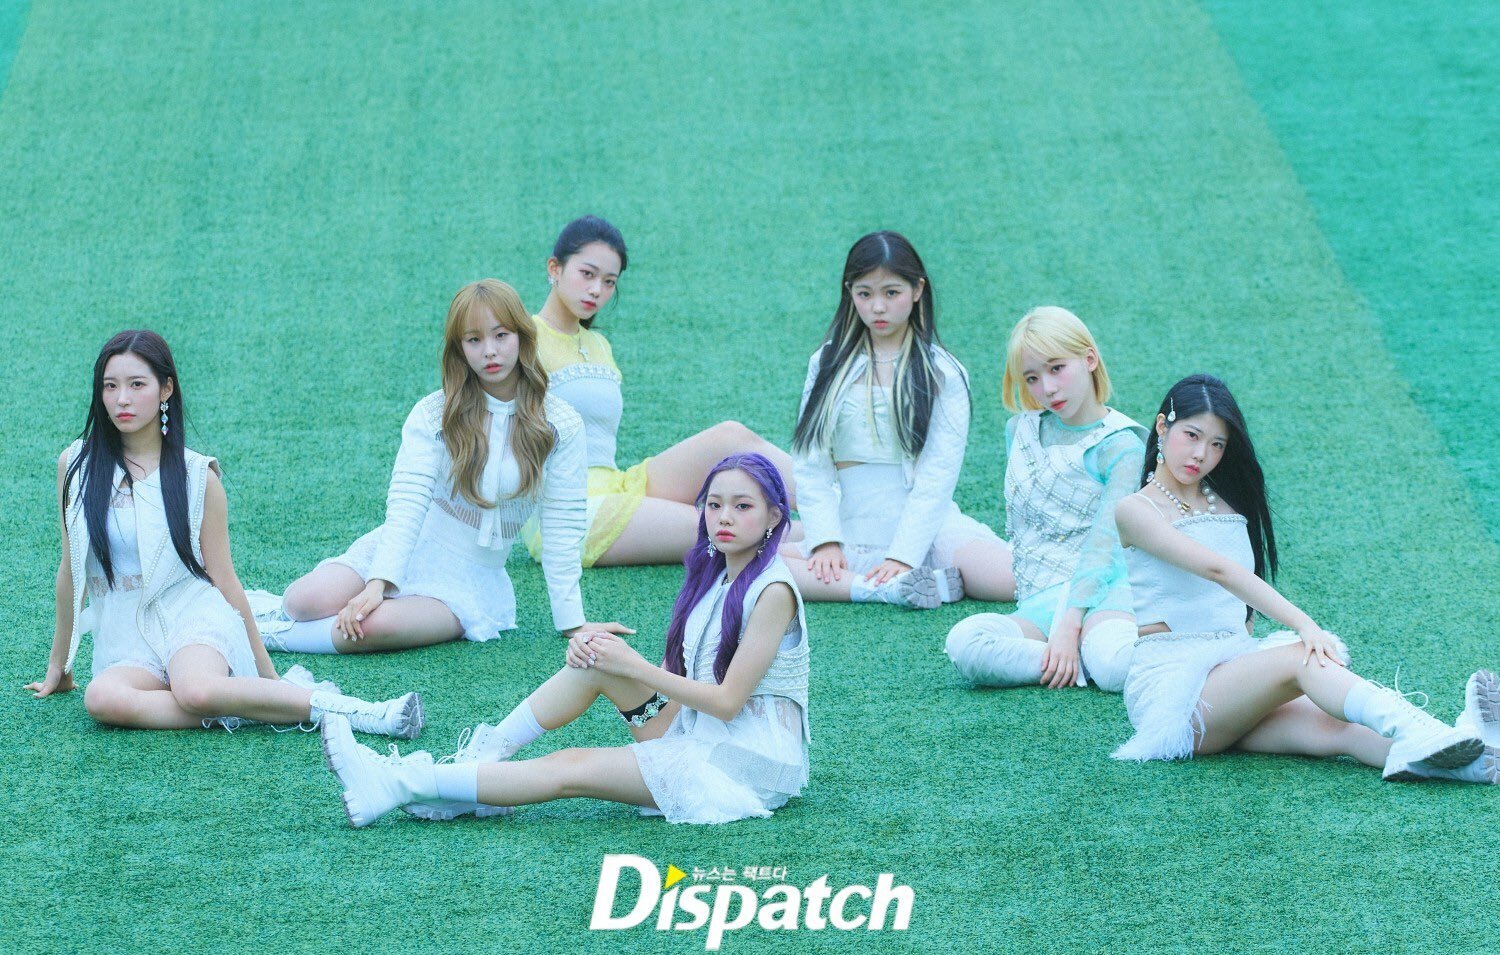 CLASS:Y Debut Photohoot with Dispatch